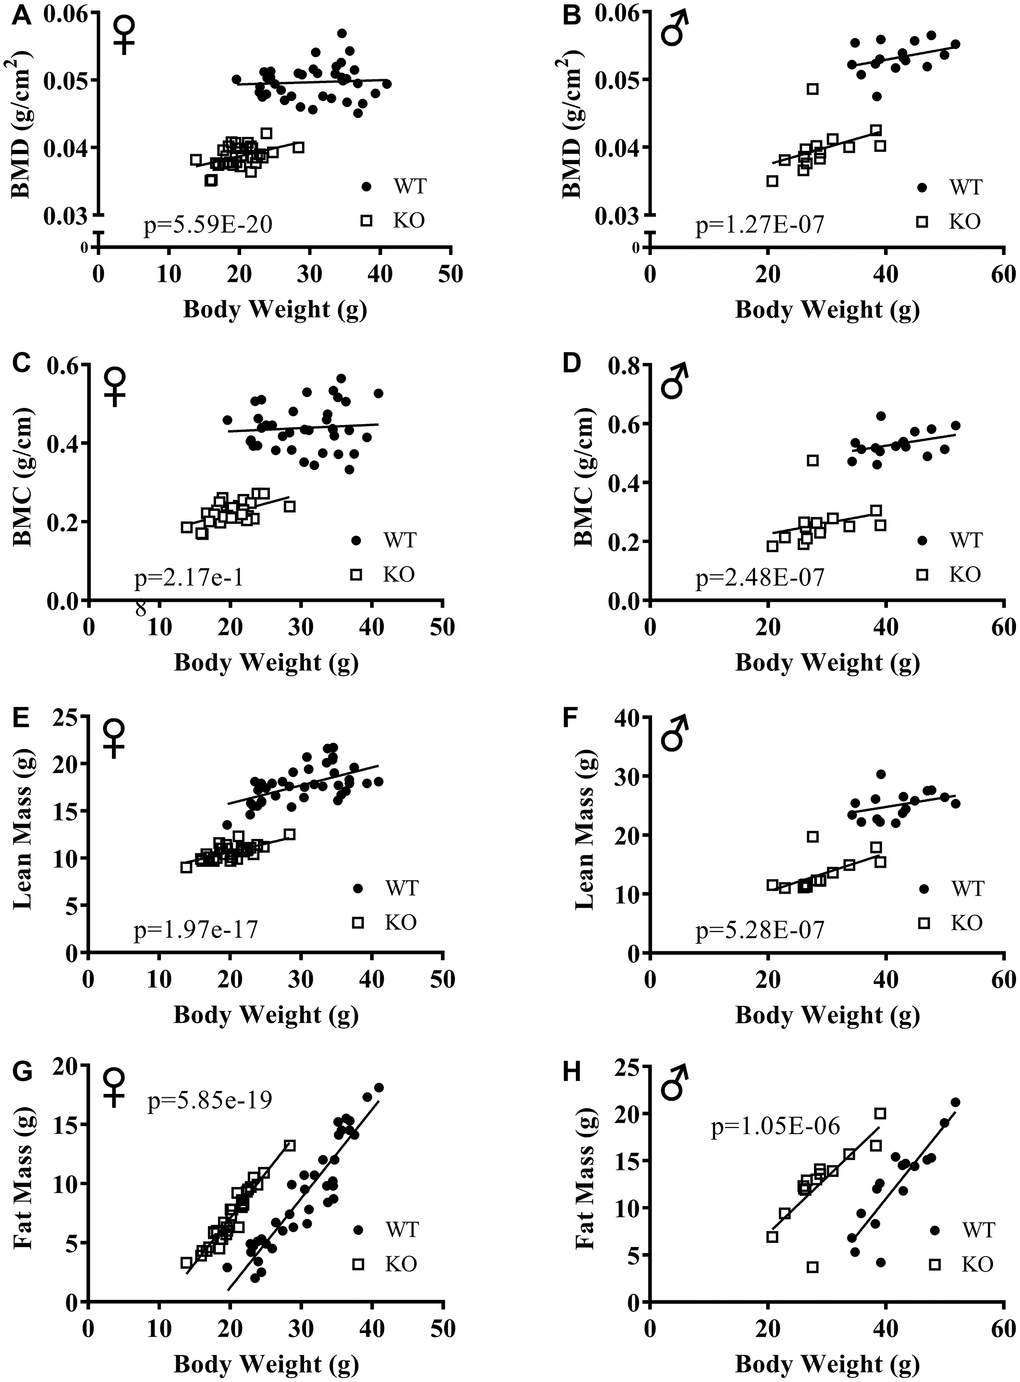 ANCOVA shows that GH-deficiency alters body composition parameters. Body composition parameters were measured by DXA. Body composition parameters are plotted on the y-axis and body weights are plotted on the x-axis (A–H). Relationship between body weight and BMD in female (A) and male (B) WT and GHRH-/- mice. Relationship between body weight and BMC in female (C) and male (D) WT and GHRH-/- mice. Relationship between body weight and lean mass in female (E) and male (F) WT and GHRH-/- mice. Relationship between body weight and fat mass in female (G) and male (H) WT and GHRH-/- mice. Female WT n=38, GHRH-/- n=31, male WT n=16, GHRH-/- n=14. The WT and GHRH-/- groups were statistically analyzed with ANCOVA method, which was used to calculate p values, shown on each panel.